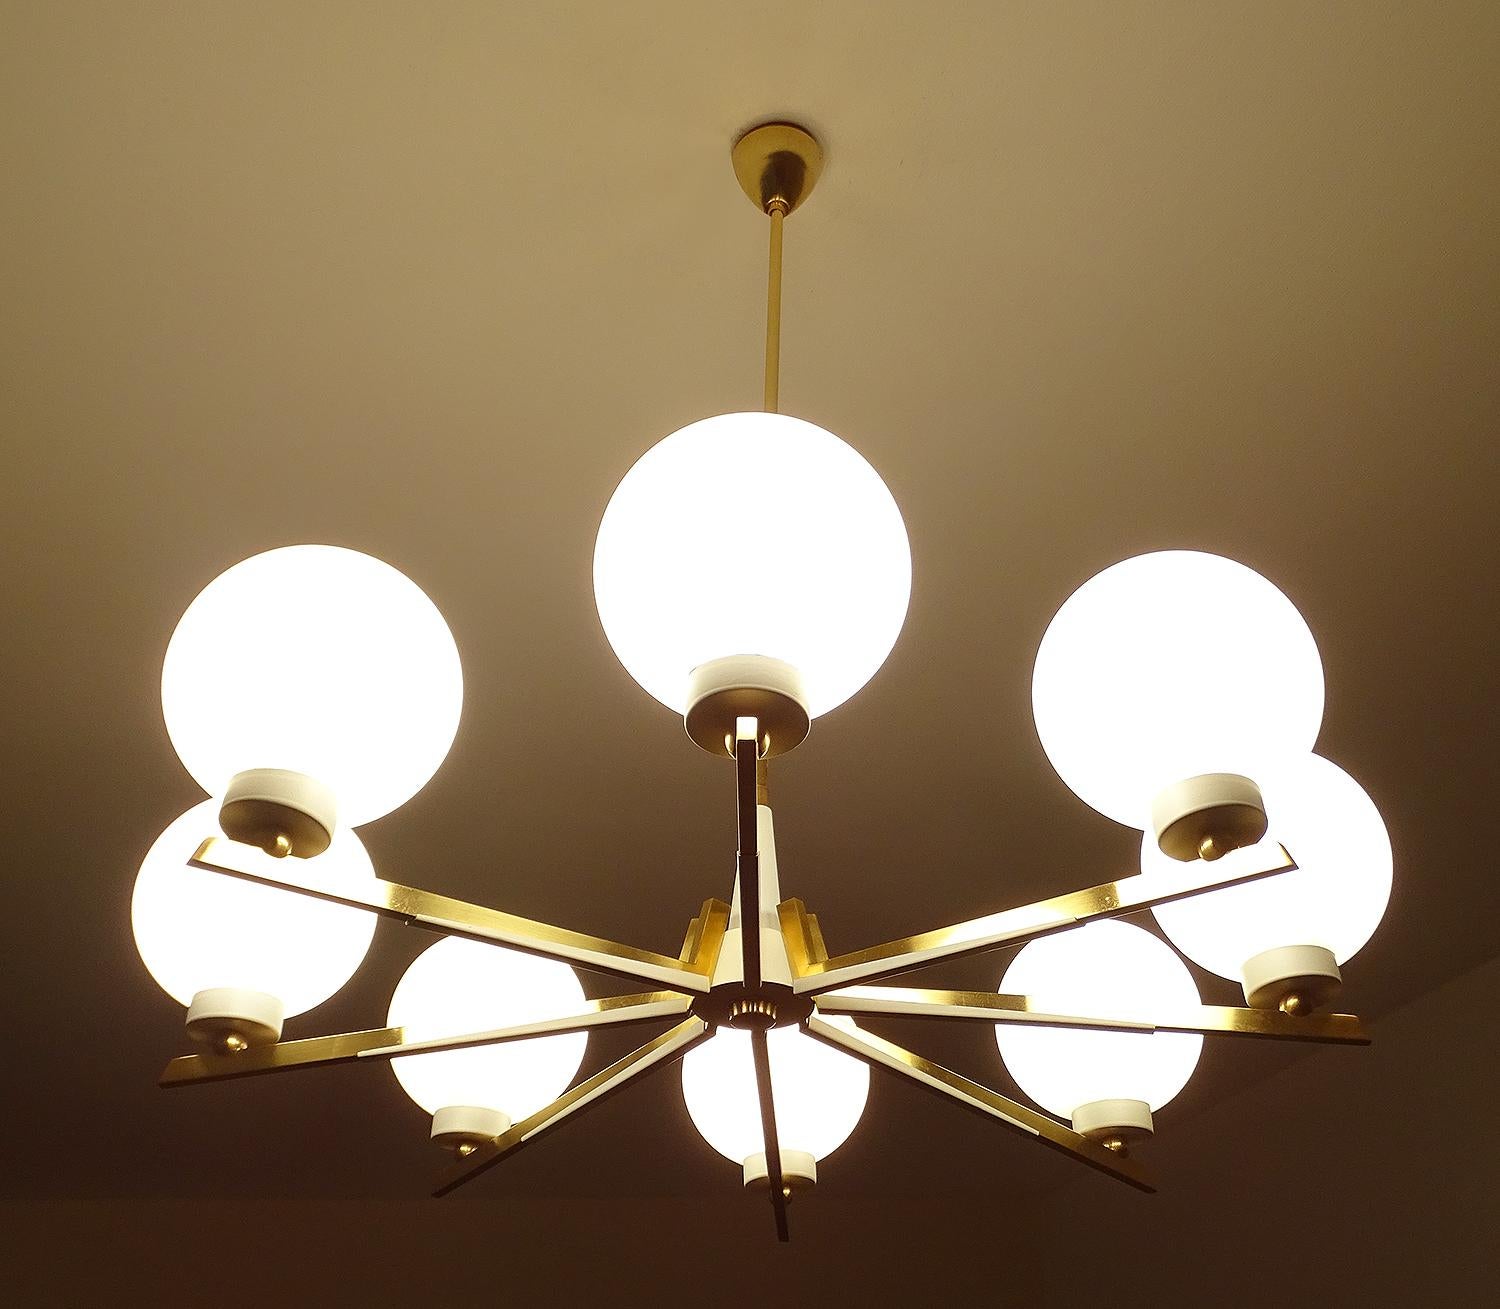 Large 1960s chandelier in the manner of Stilnovo,  white enameled arms with brass trim, opaline glass diffusers.
Dimensions
Height 29.53 in. x diameter 26.78 in.
Height 75 cm x diameter 68 cm
Eight candelabra size bulbs, 40 watts each.




The